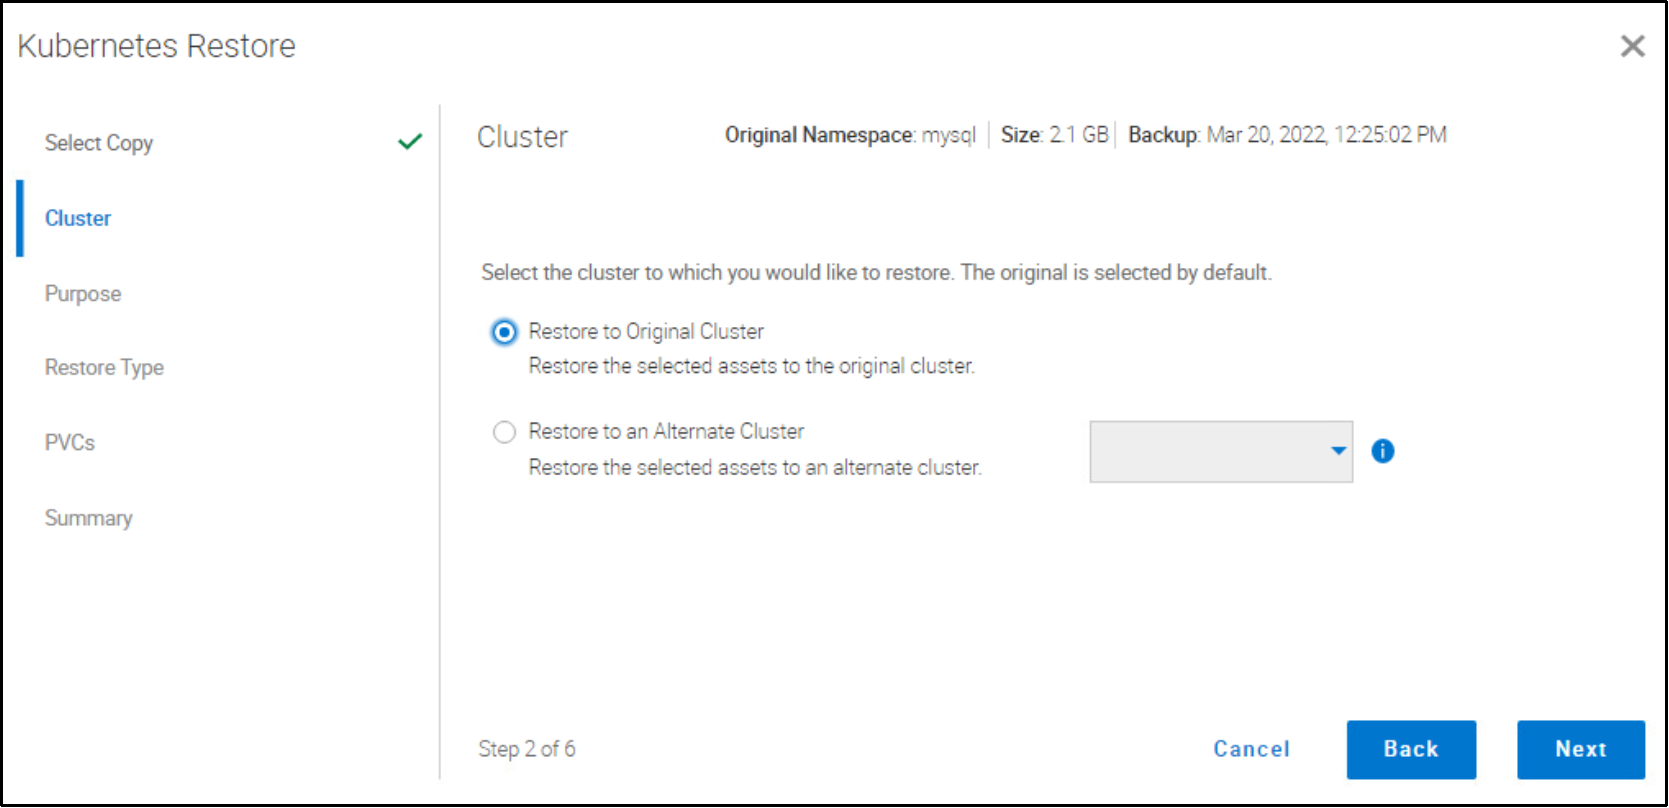 The image shows the options to recover the Kubernetes namespaces to the same or to an alternate cluster. 